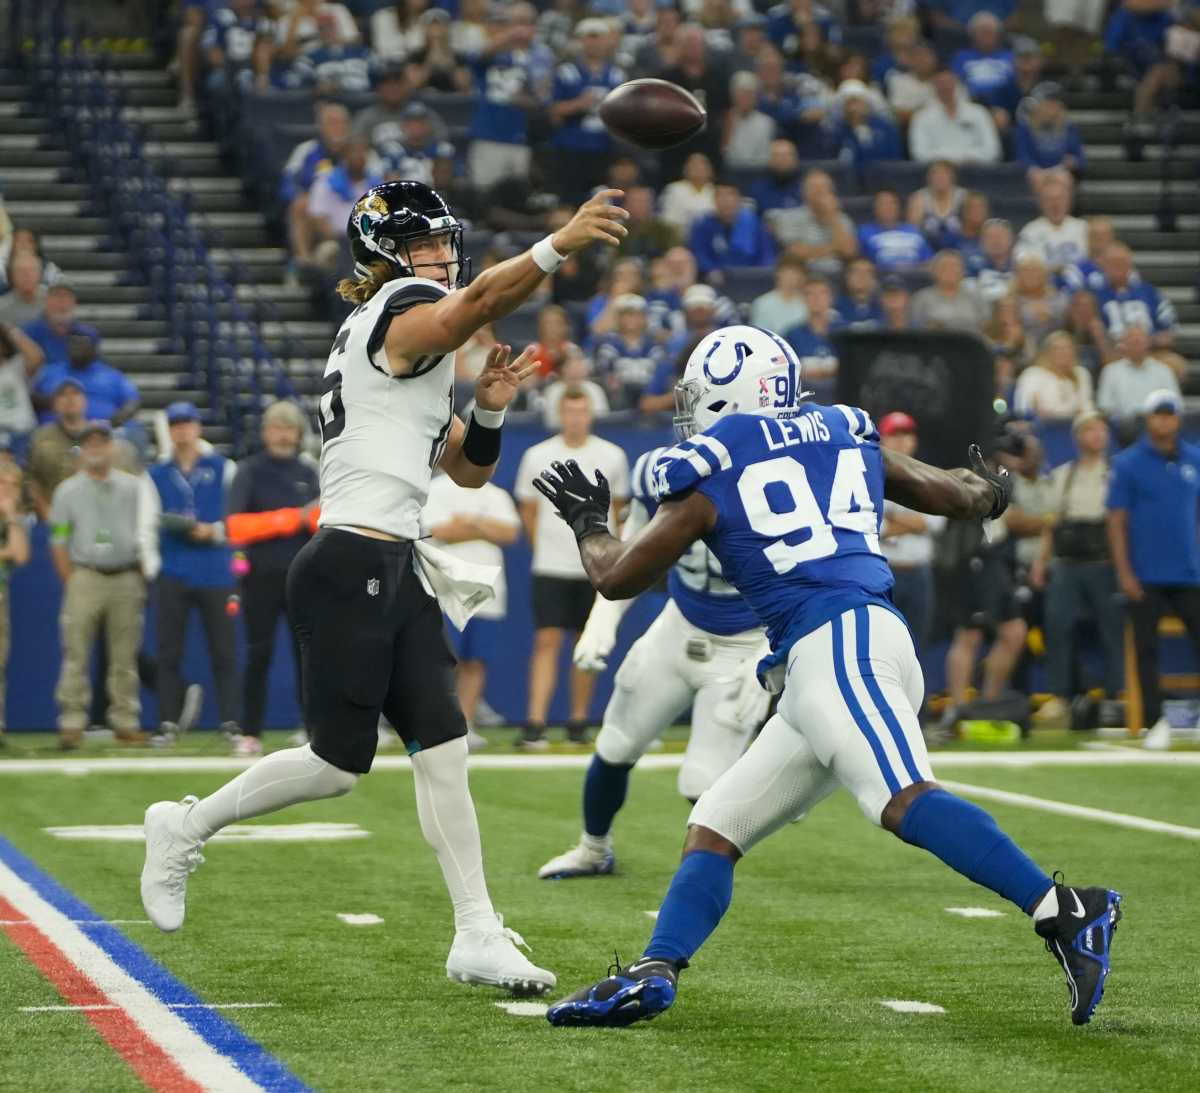 Jacksonville Jaguars quarterback Trevor Lawrence (16) throws the ball over Indianapolis Colts defensive end Tyquan Lewis (94), during a game against the Jacksonville Jaguars at Lucas Oil Stadium in Indianapolis.